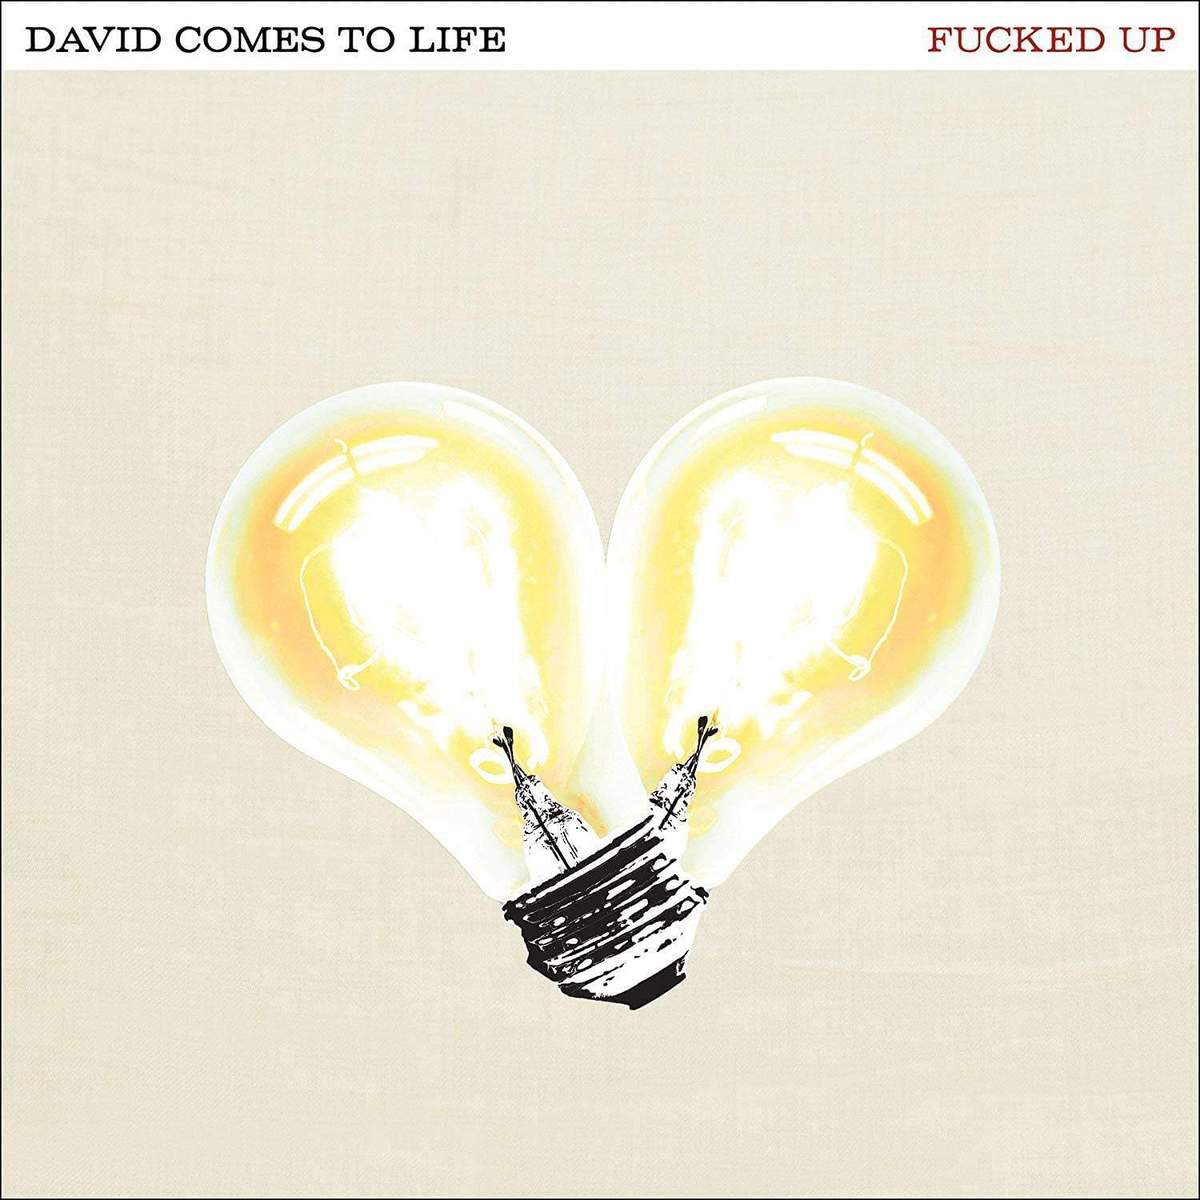 Fucked Up - David Comes To Life "10th Anniversary" (Limited Edition on Double Lightbulb Yellow Vinyl)